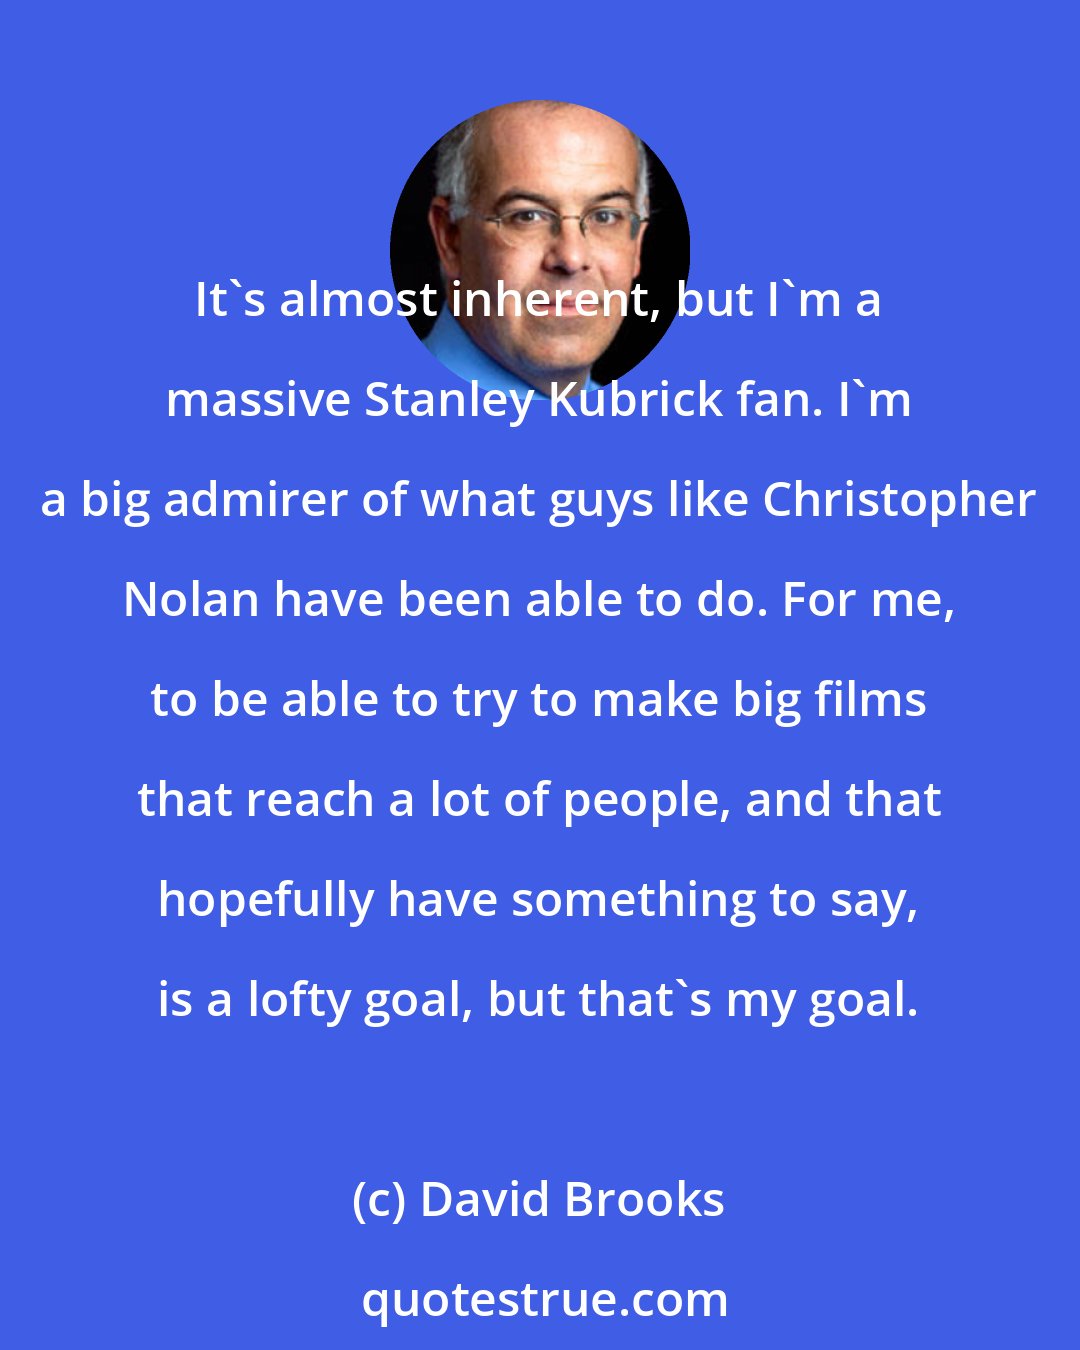 David Brooks: It's almost inherent, but I'm a massive Stanley Kubrick fan. I'm a big admirer of what guys like Christopher Nolan have been able to do. For me, to be able to try to make big films that reach a lot of people, and that hopefully have something to say, is a lofty goal, but that's my goal.